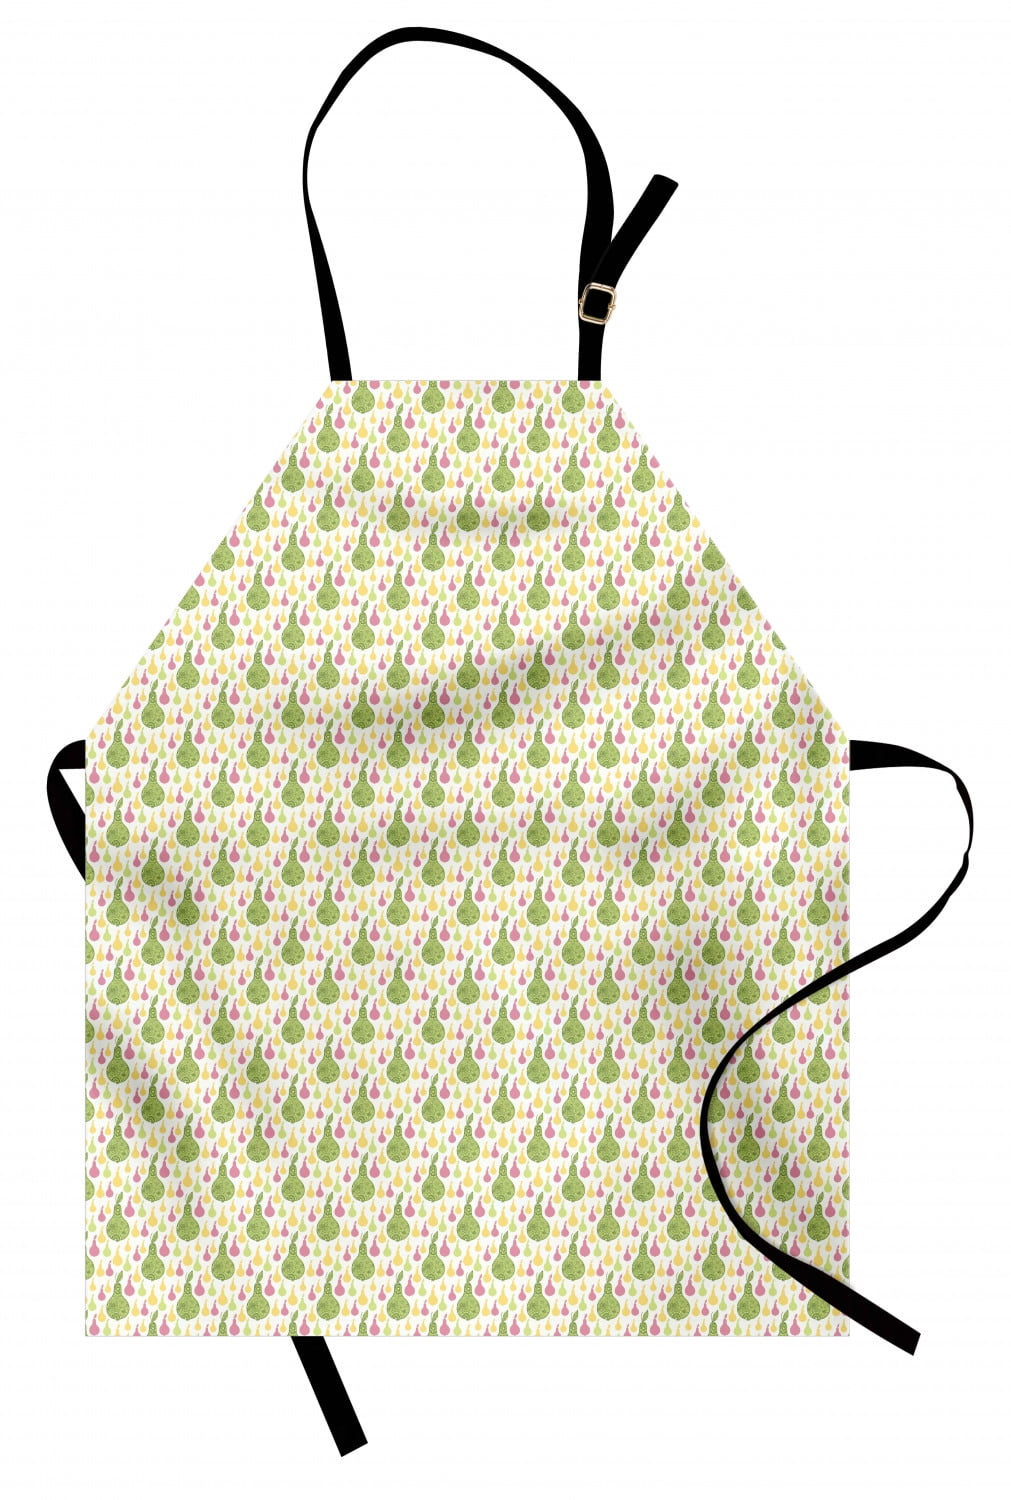 Details about   Unisex Standard Size Apron Bib Adjustable Strap for Gardening Cooking Ambesonne 